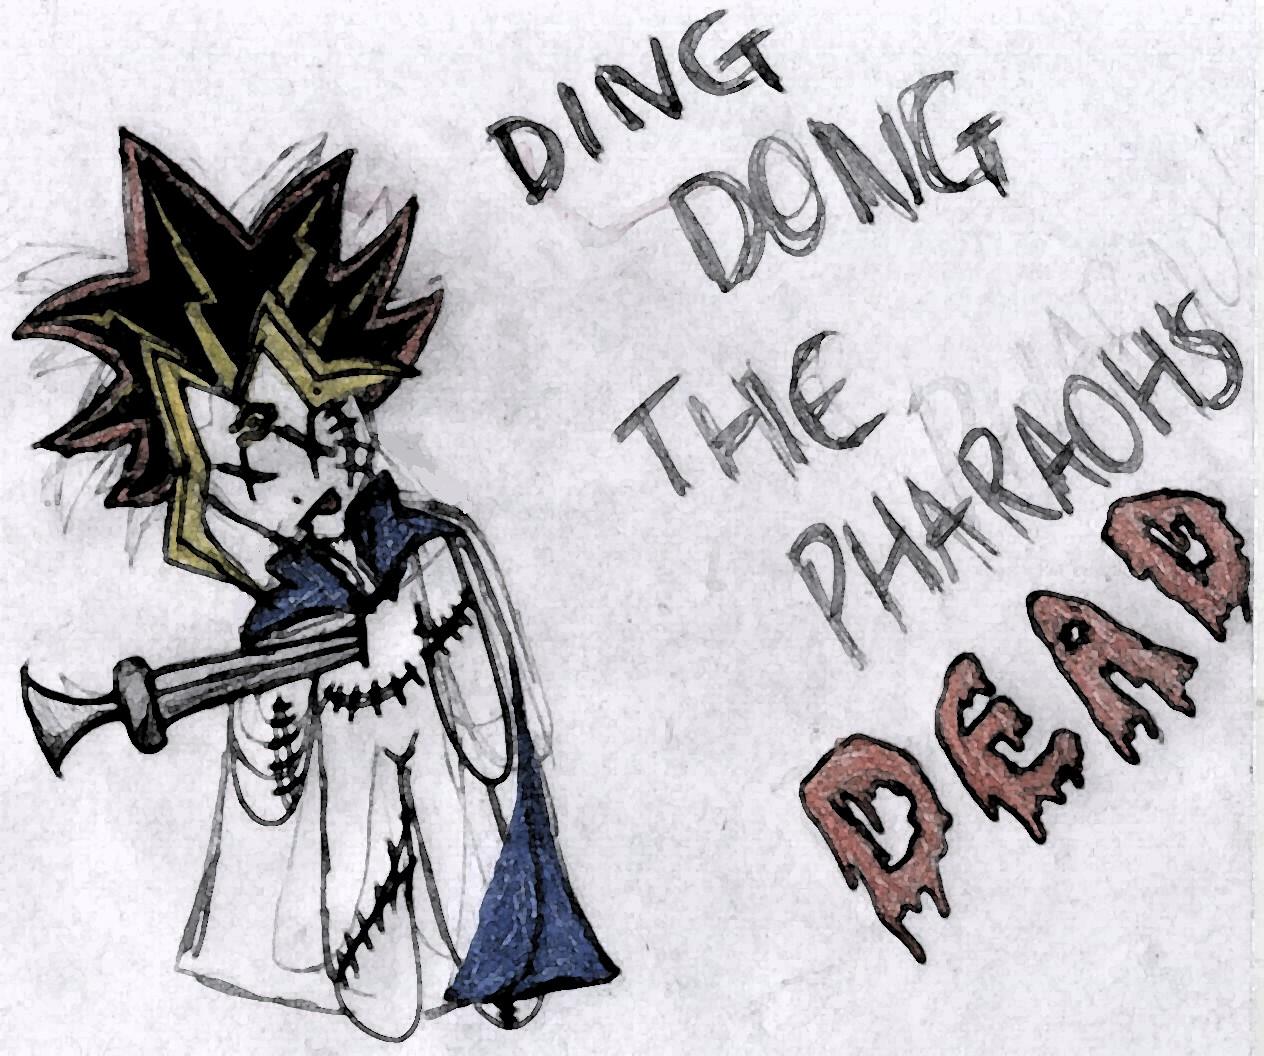 Yami is... Dead. x) by desecrated